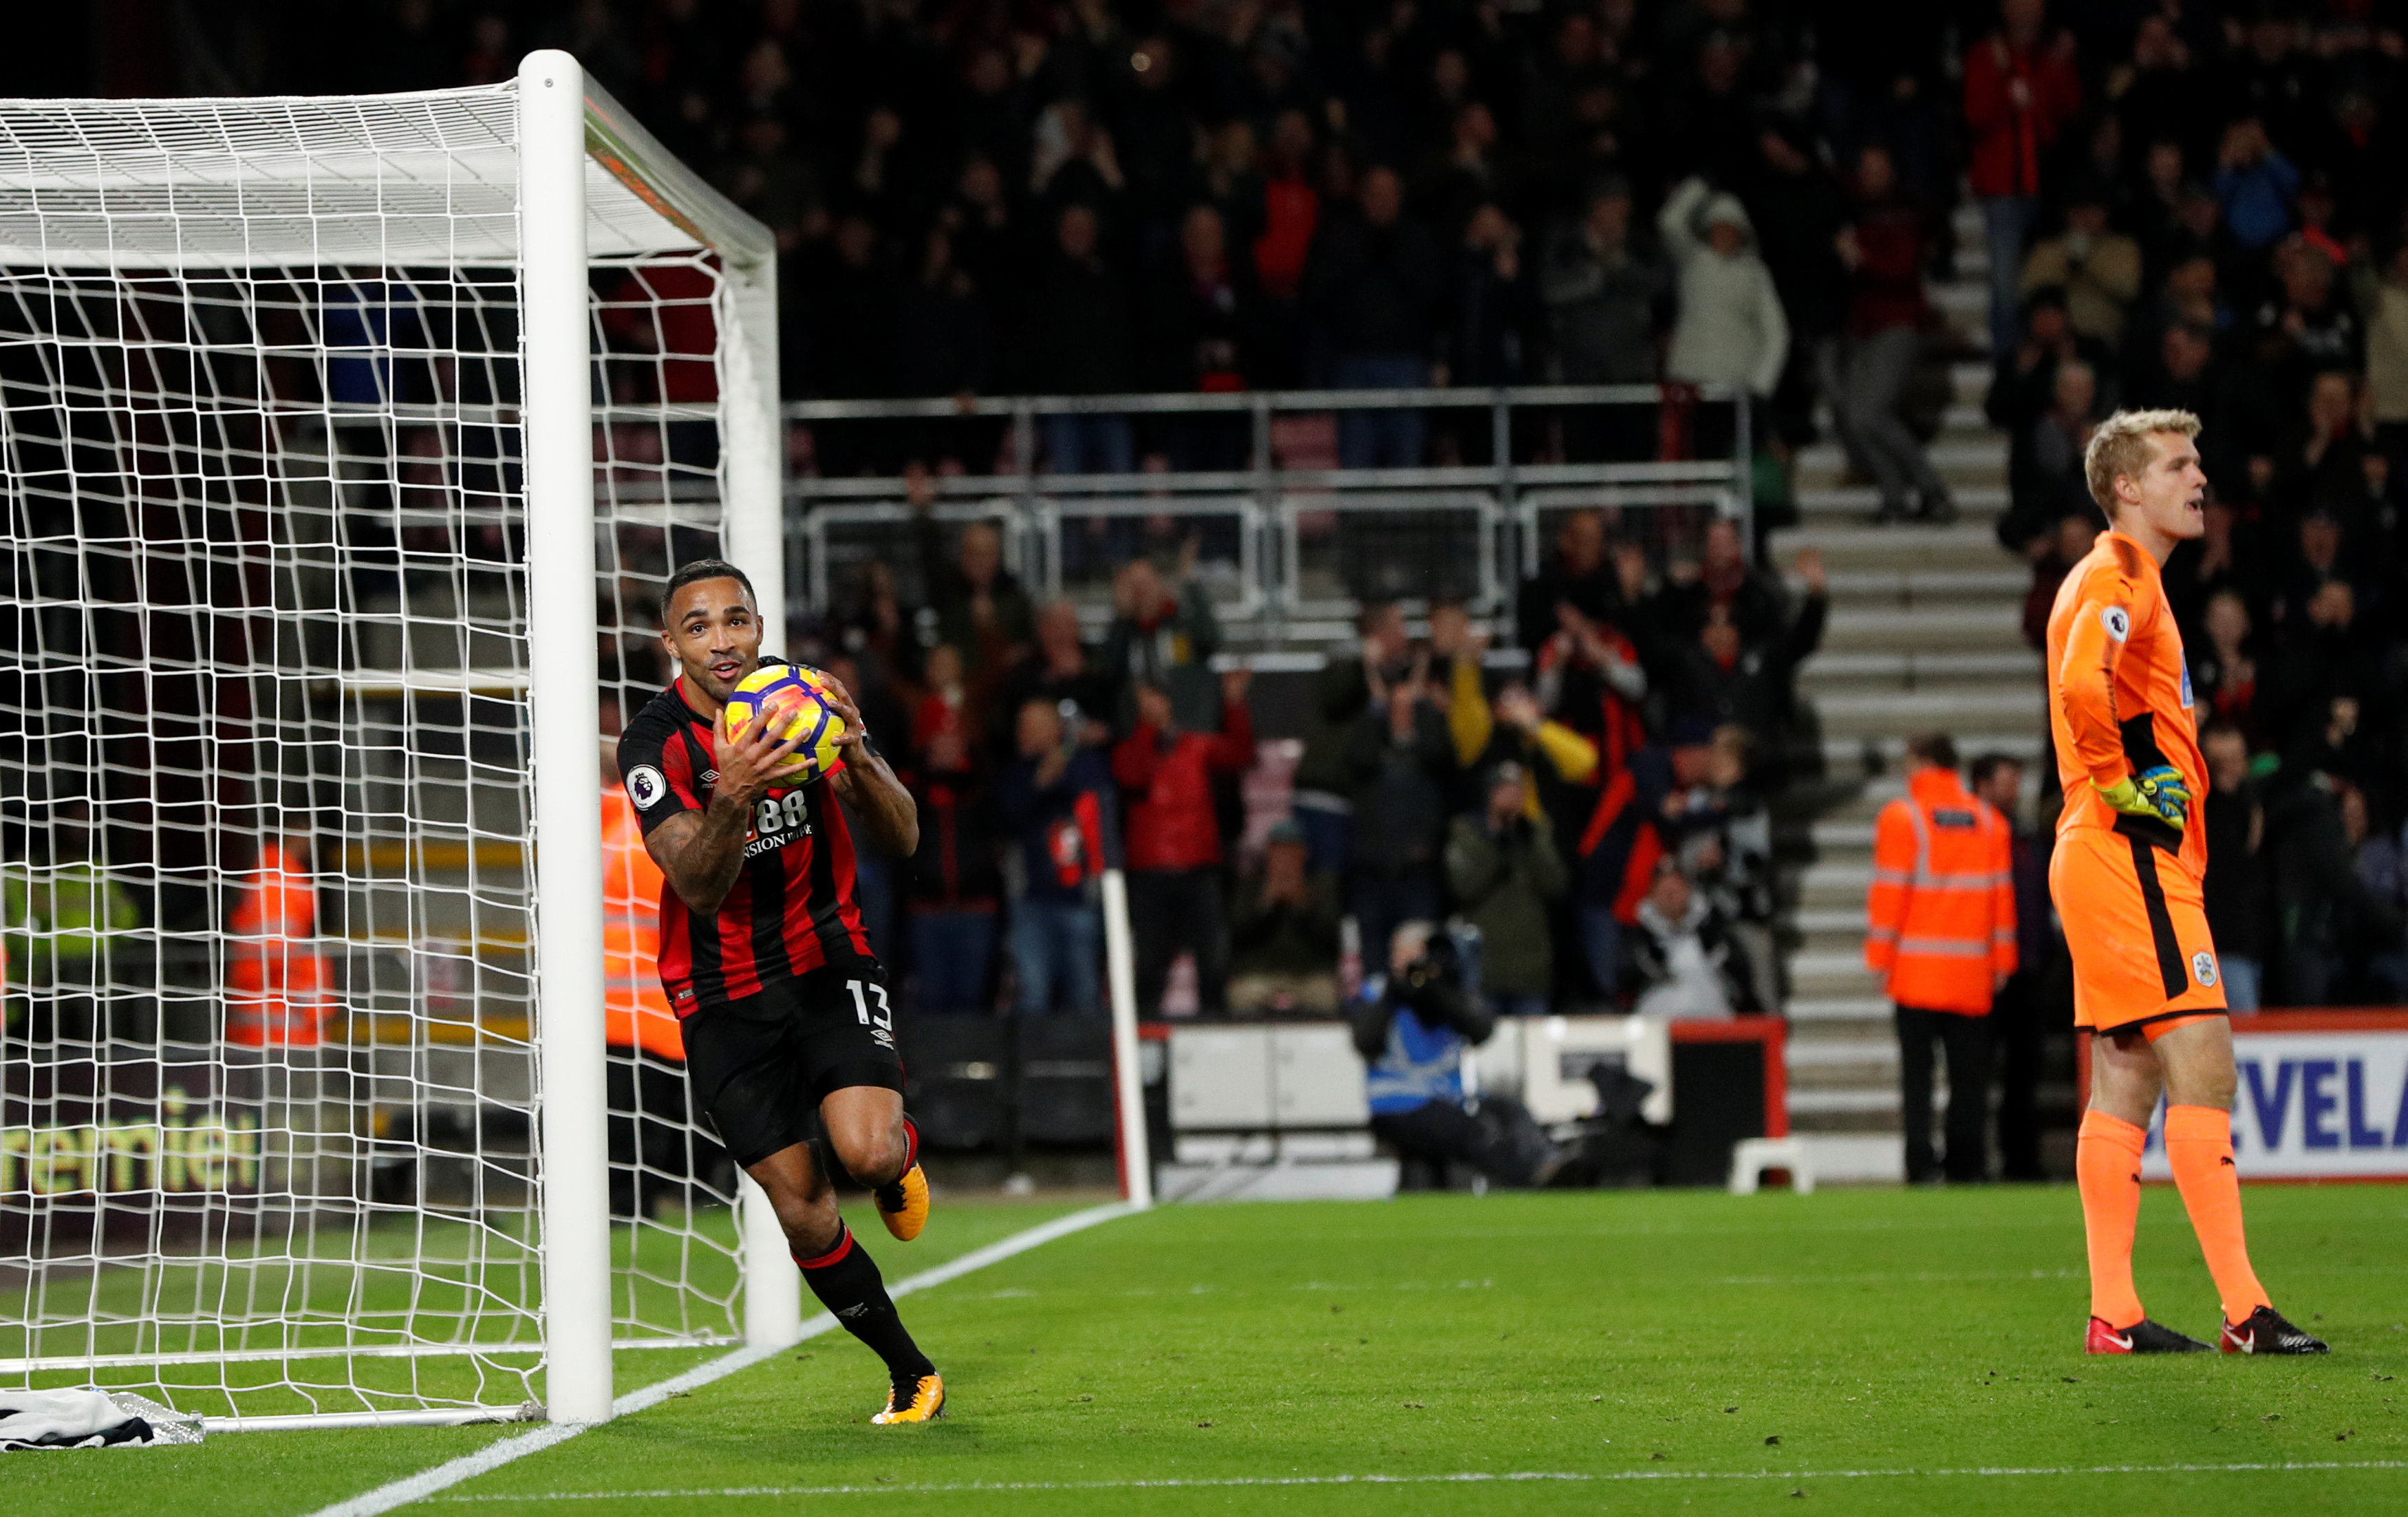 Football: Wilson nets impressive hat-trick for Bournemouth against Huddersfield